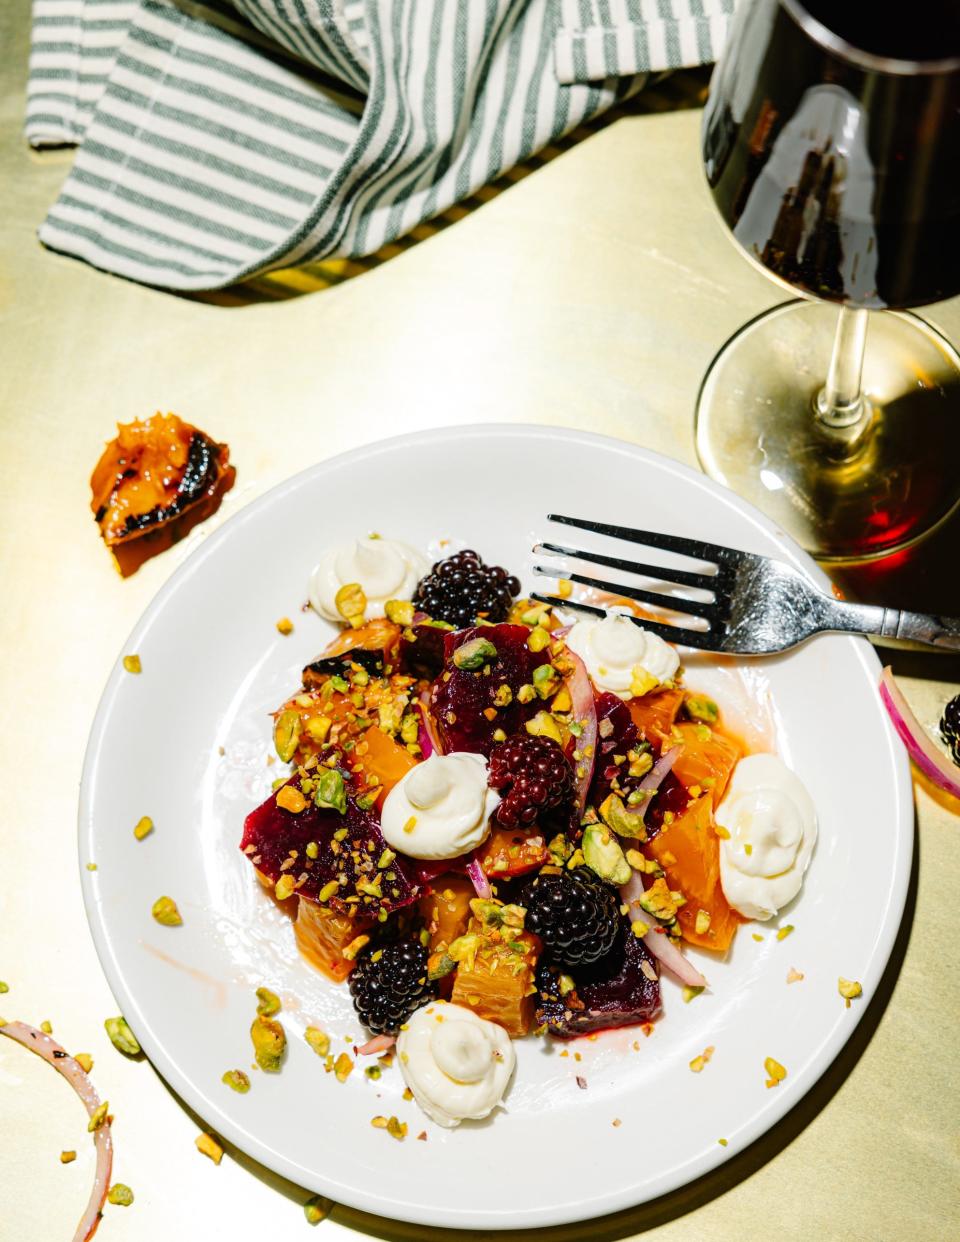 Salad with beets, grilled peaches, pickled blackberries, pistachio, Campari and taleggio for Olivero restaurant, scheduled to open in September in Wilmington, N.C.